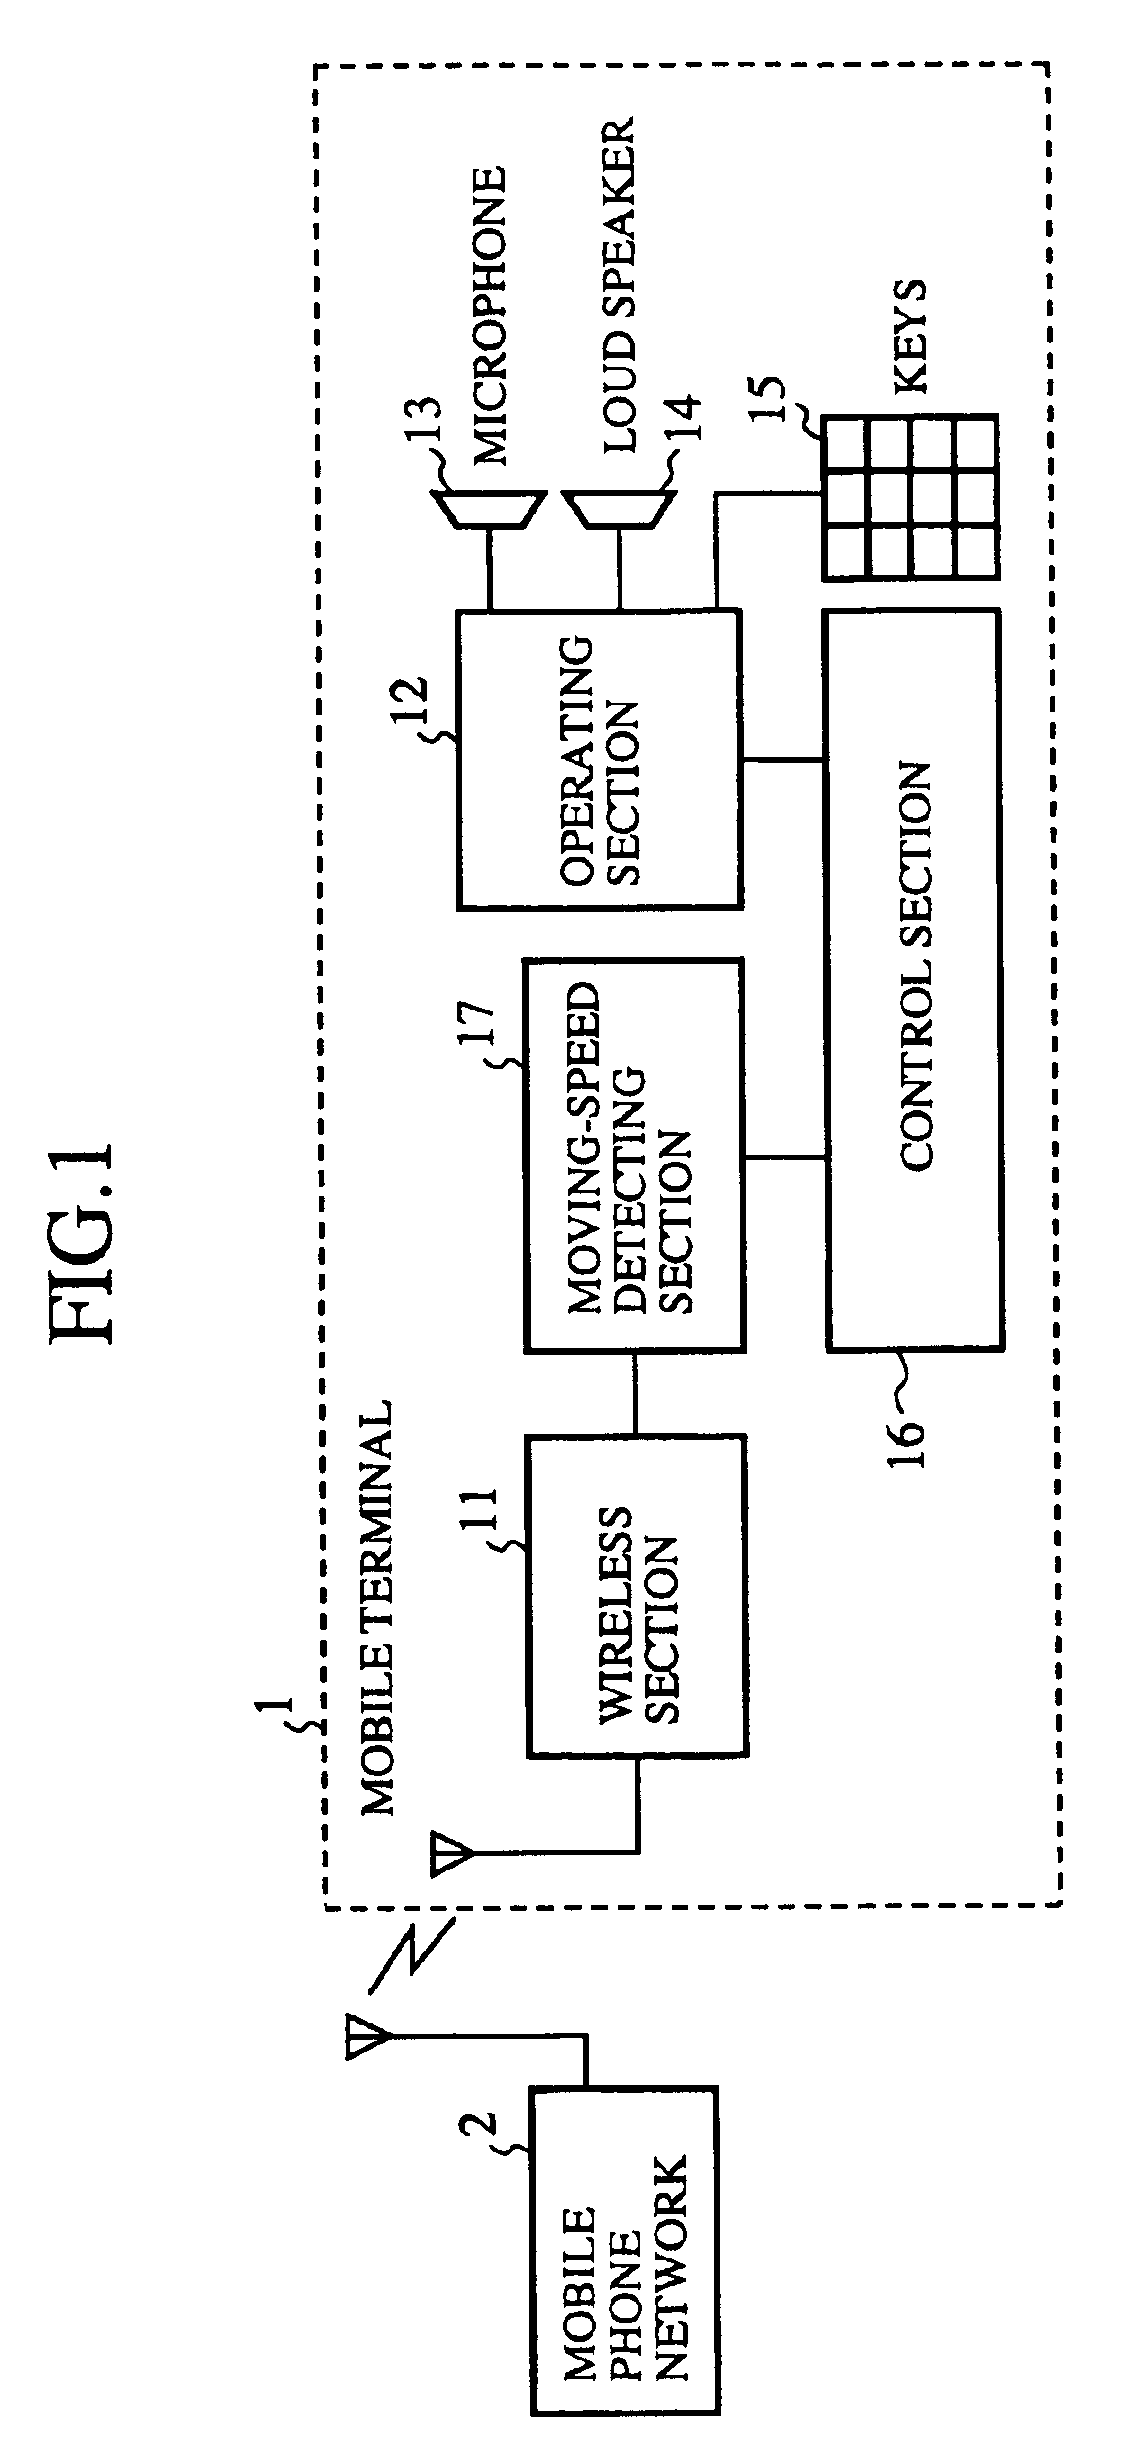 Mobile telephone system configured to confirm receiver speed conditions